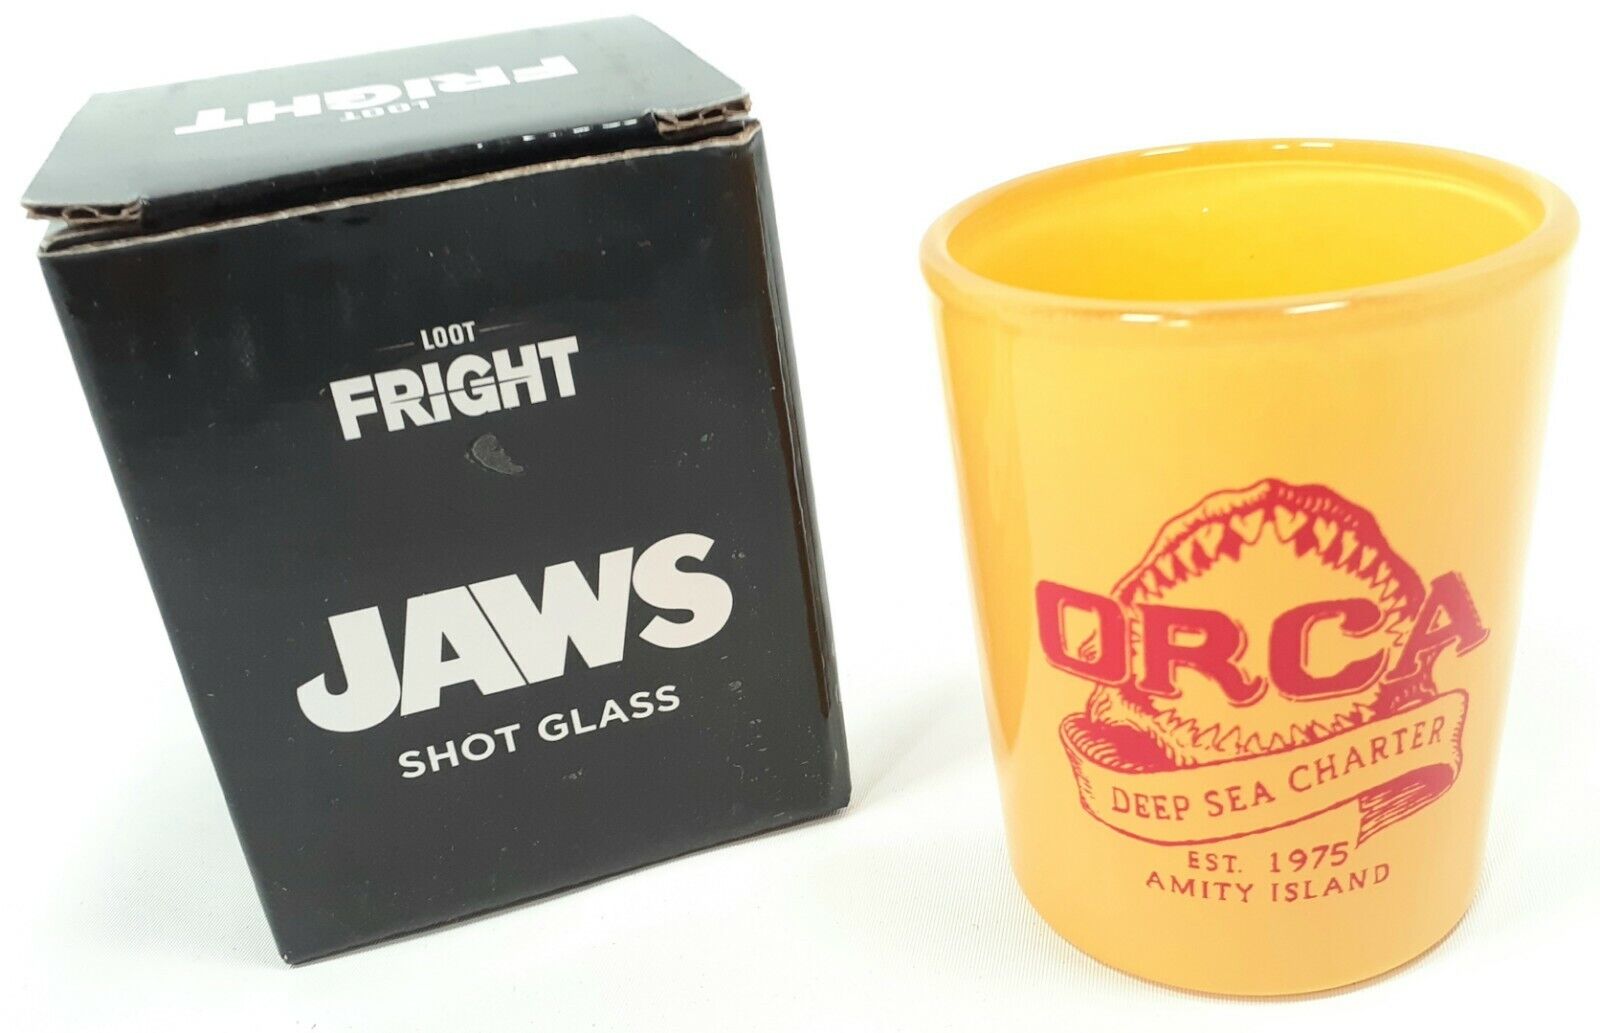 NEW JAWS MOVIE SHOT GLASS Loot Fright Crate Exclusive Orca Deep Sea Charter